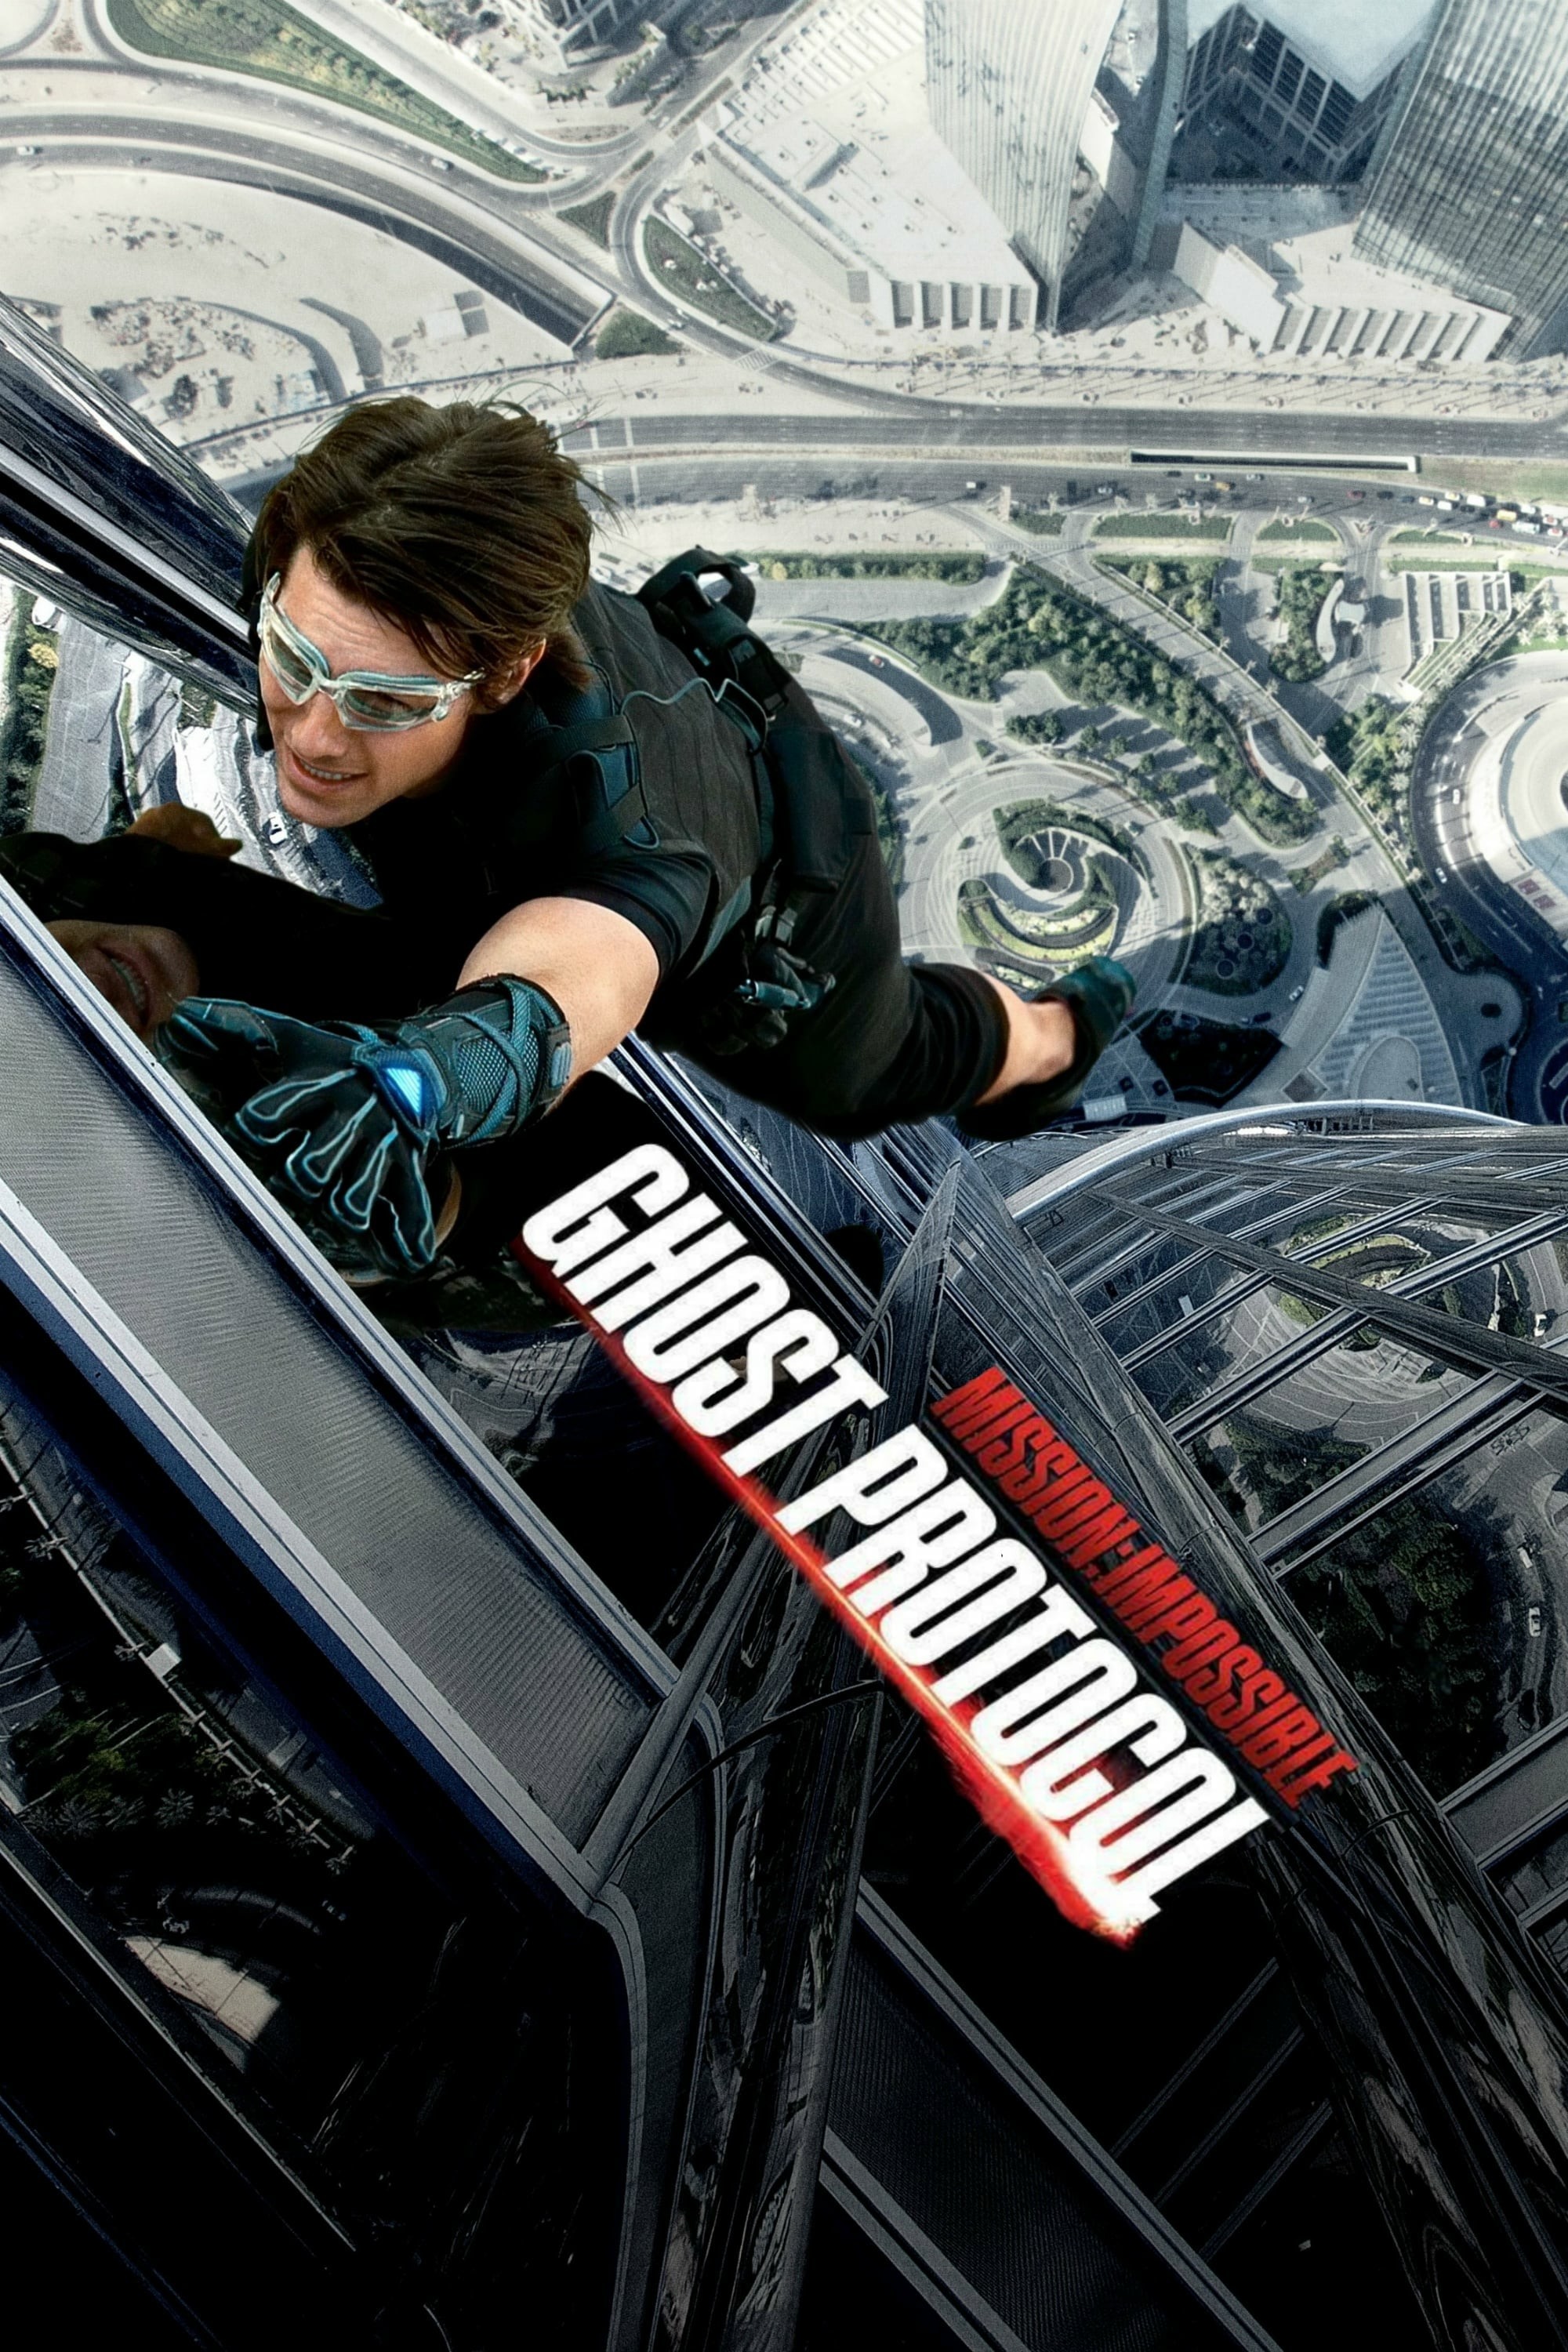 mission impossible 4 online free